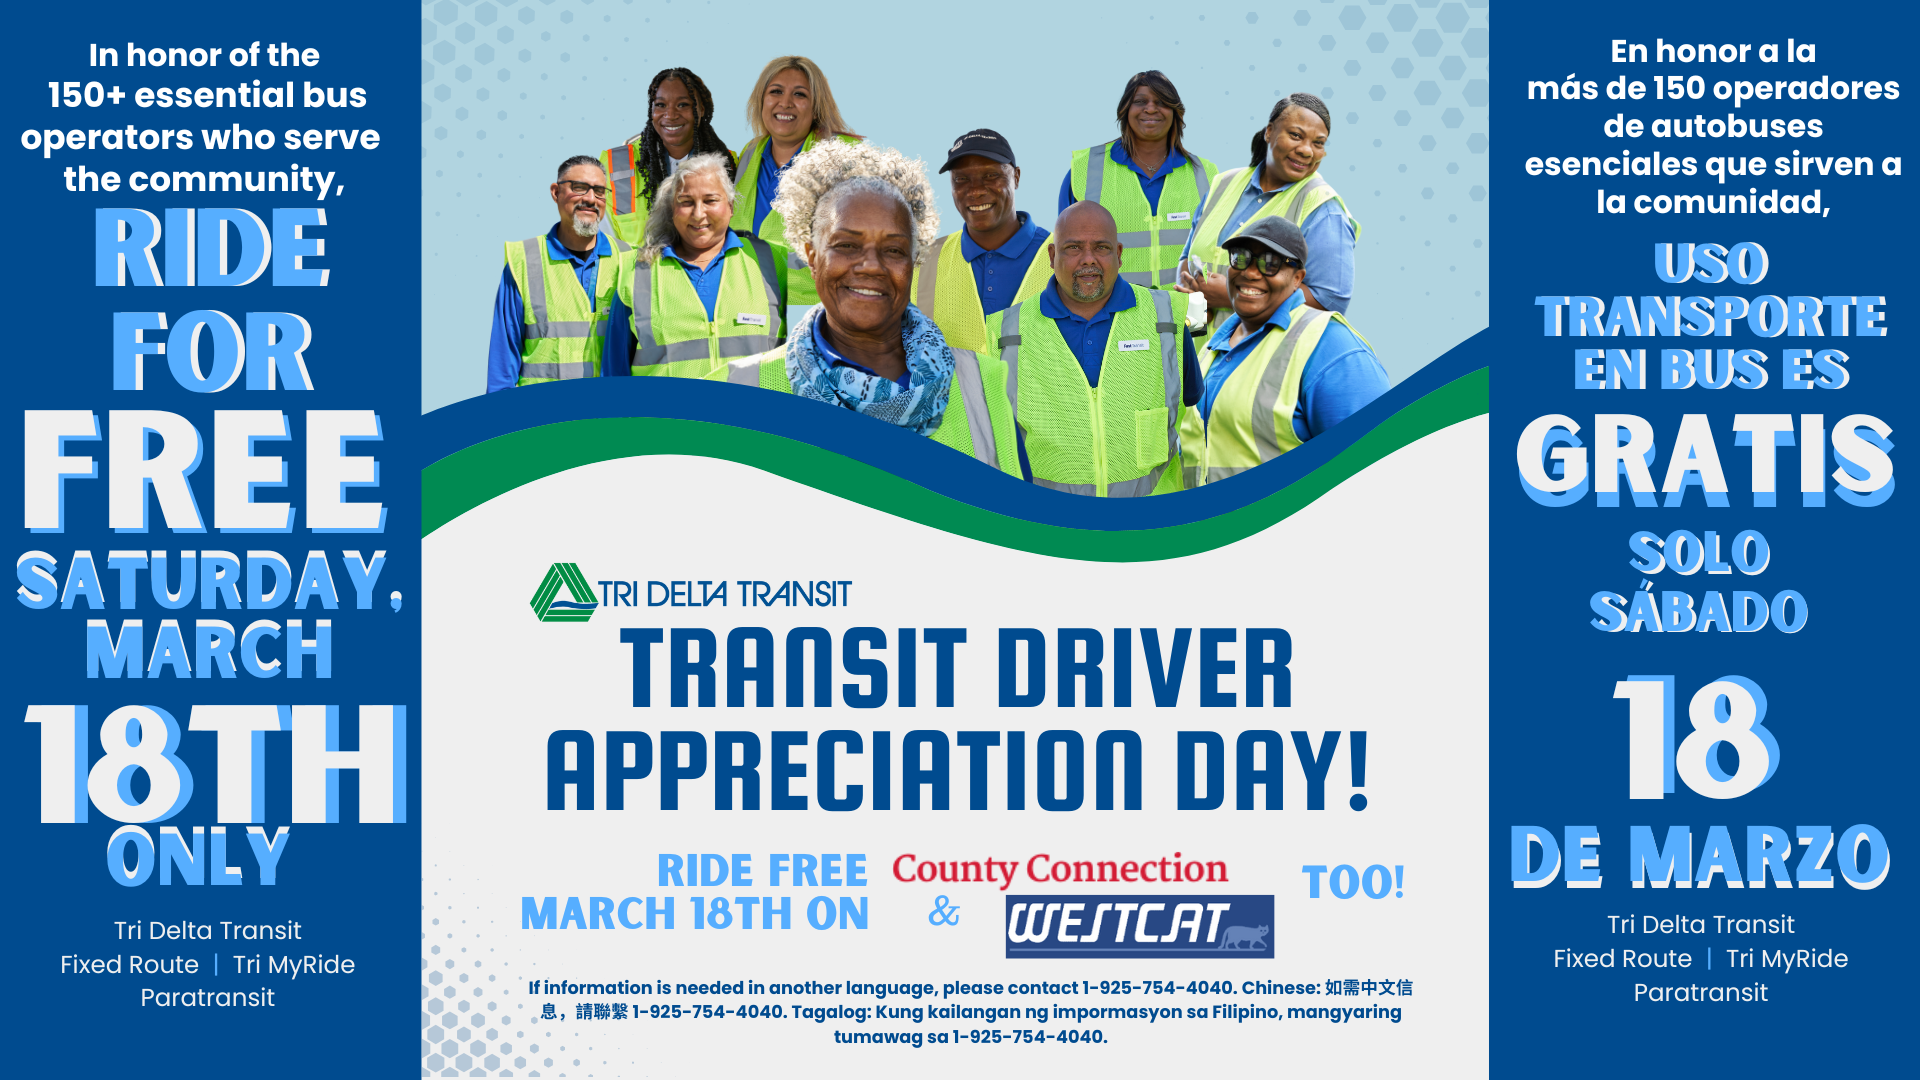 Graphic showing information about Driver Appreciation Day